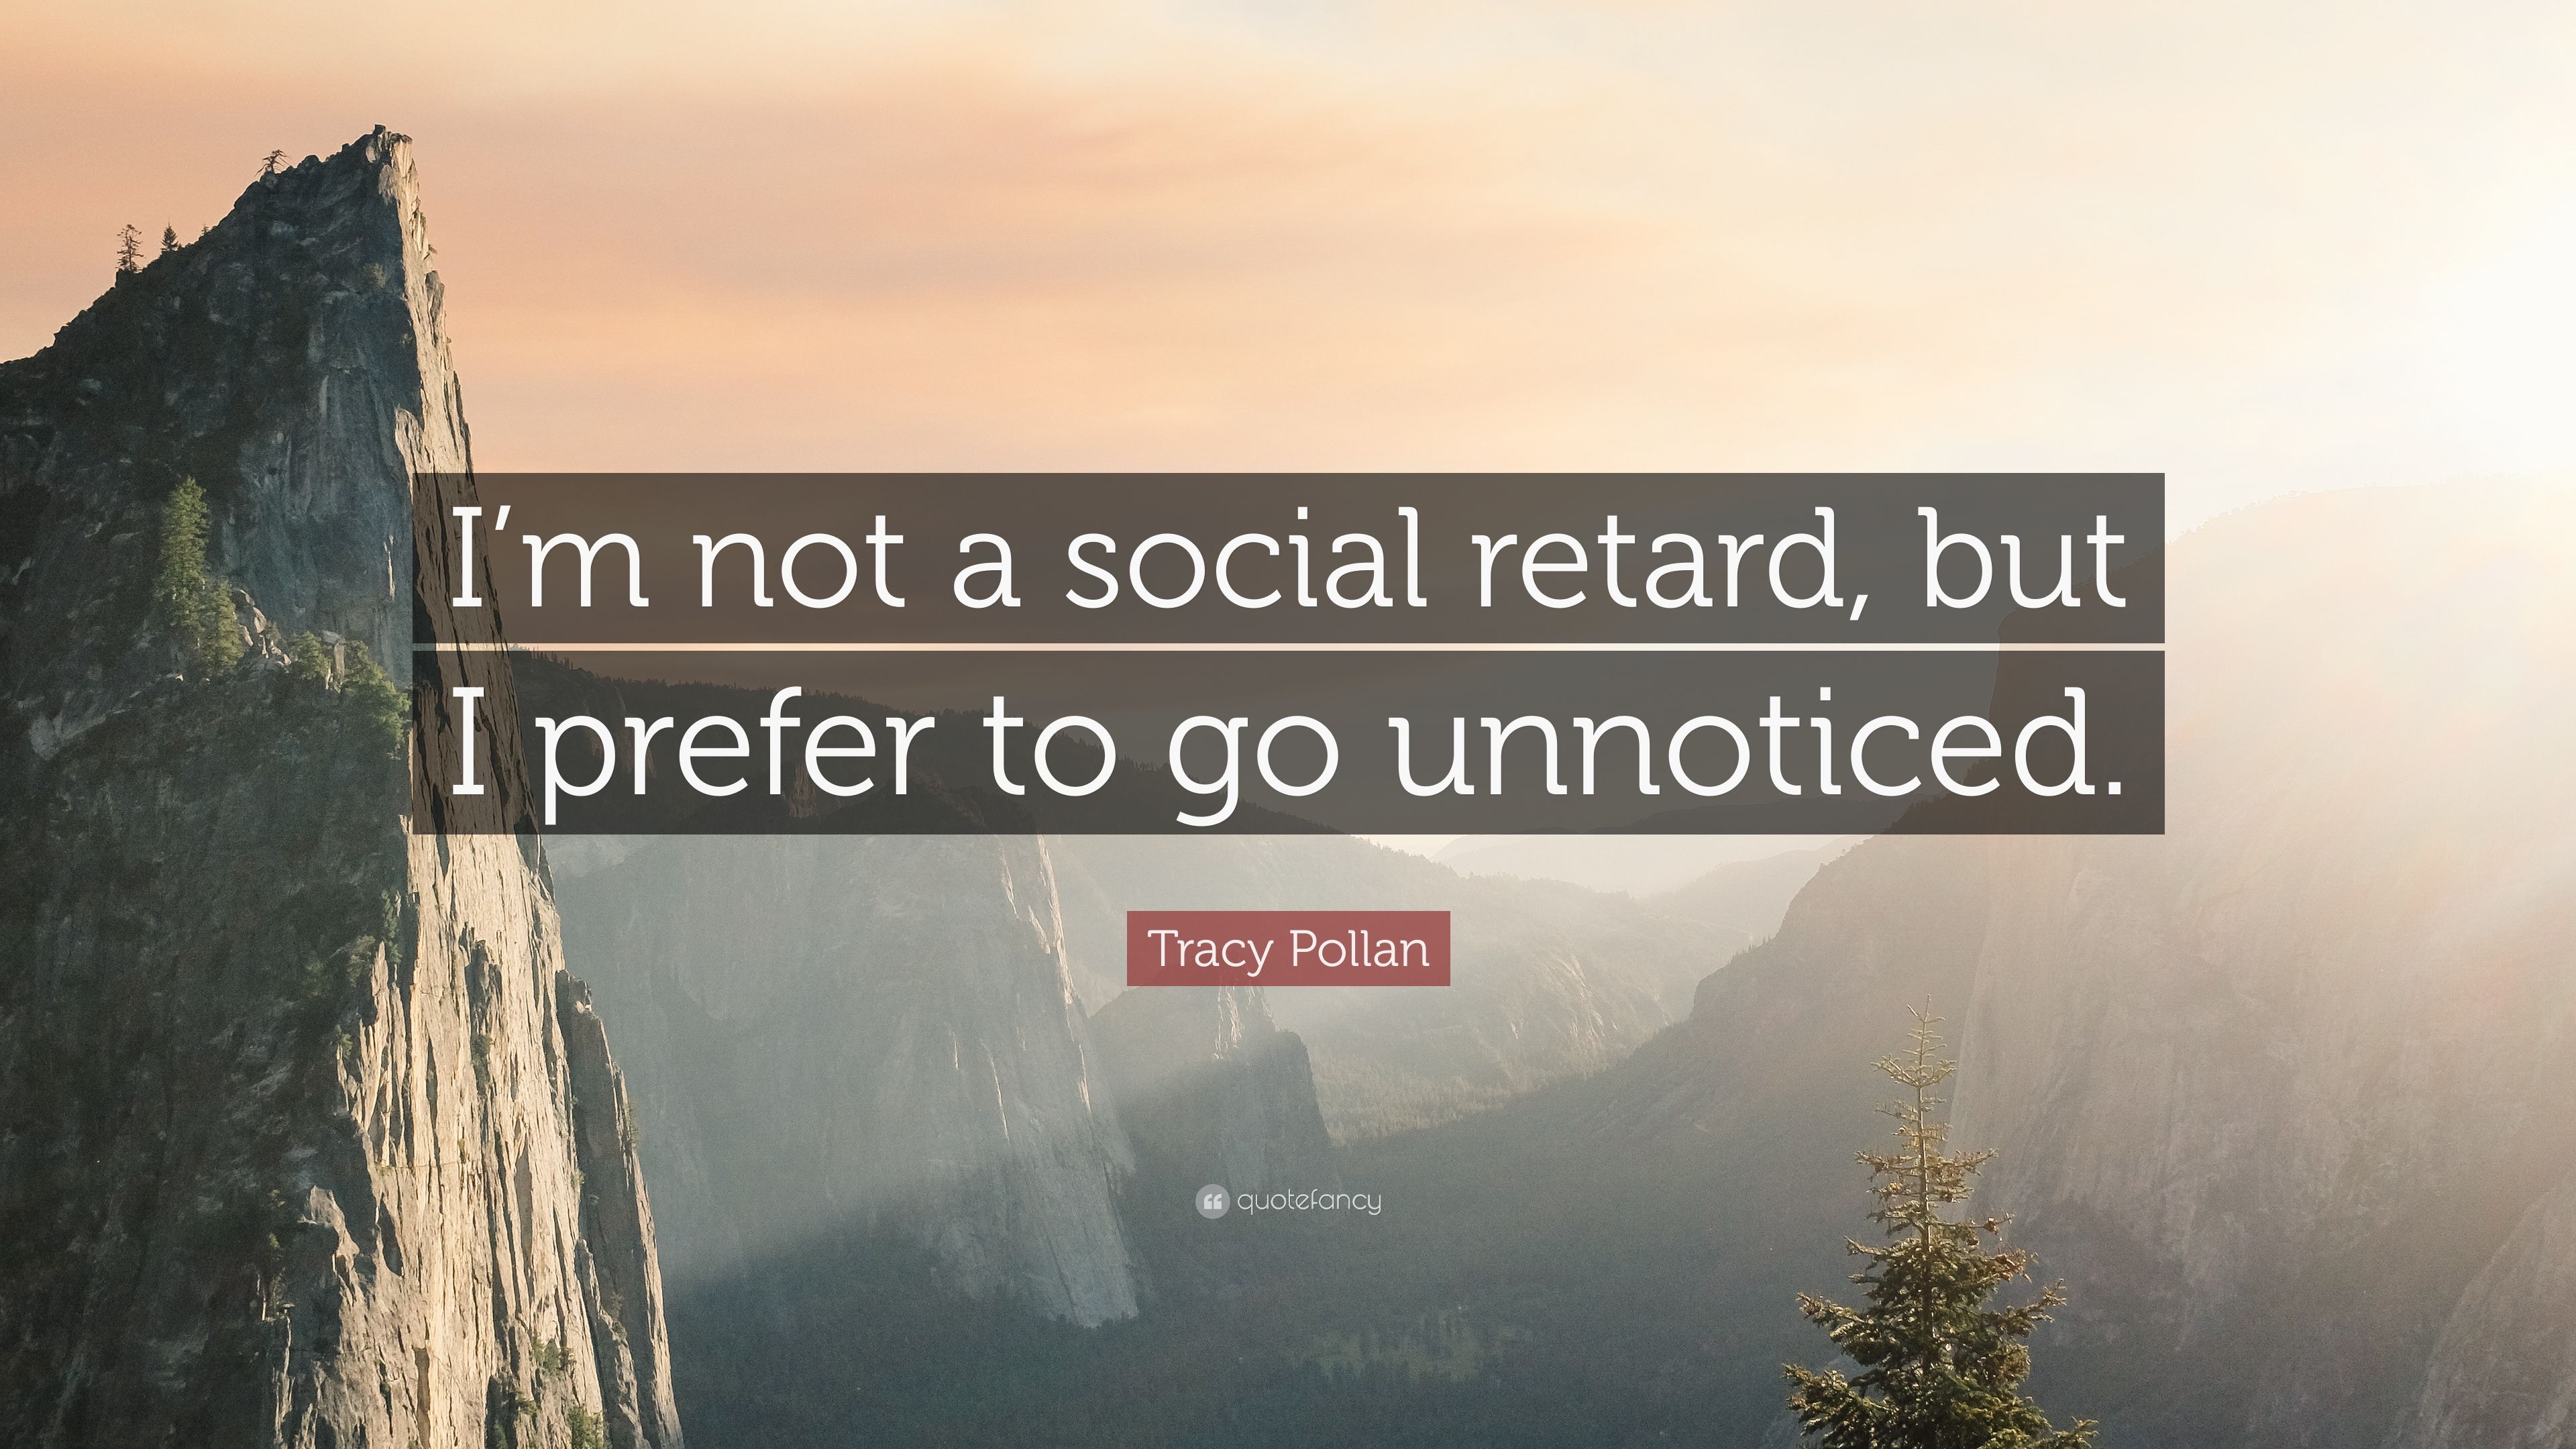 Tracy Pollan Quote: “I'm not a social retard, but I prefer to go